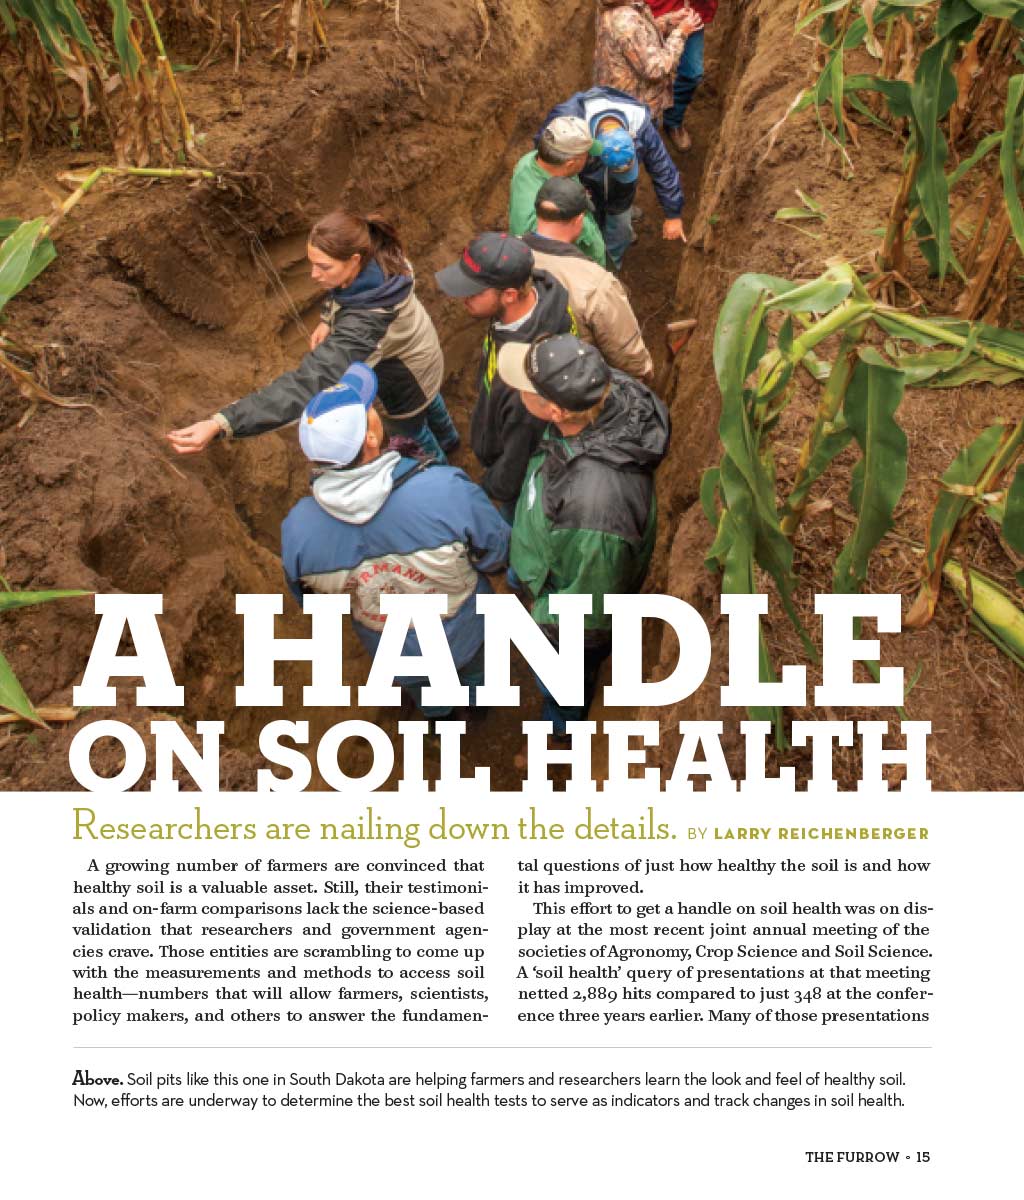 an excerpt from the "A Handle on Soil Health" article from The Furrow